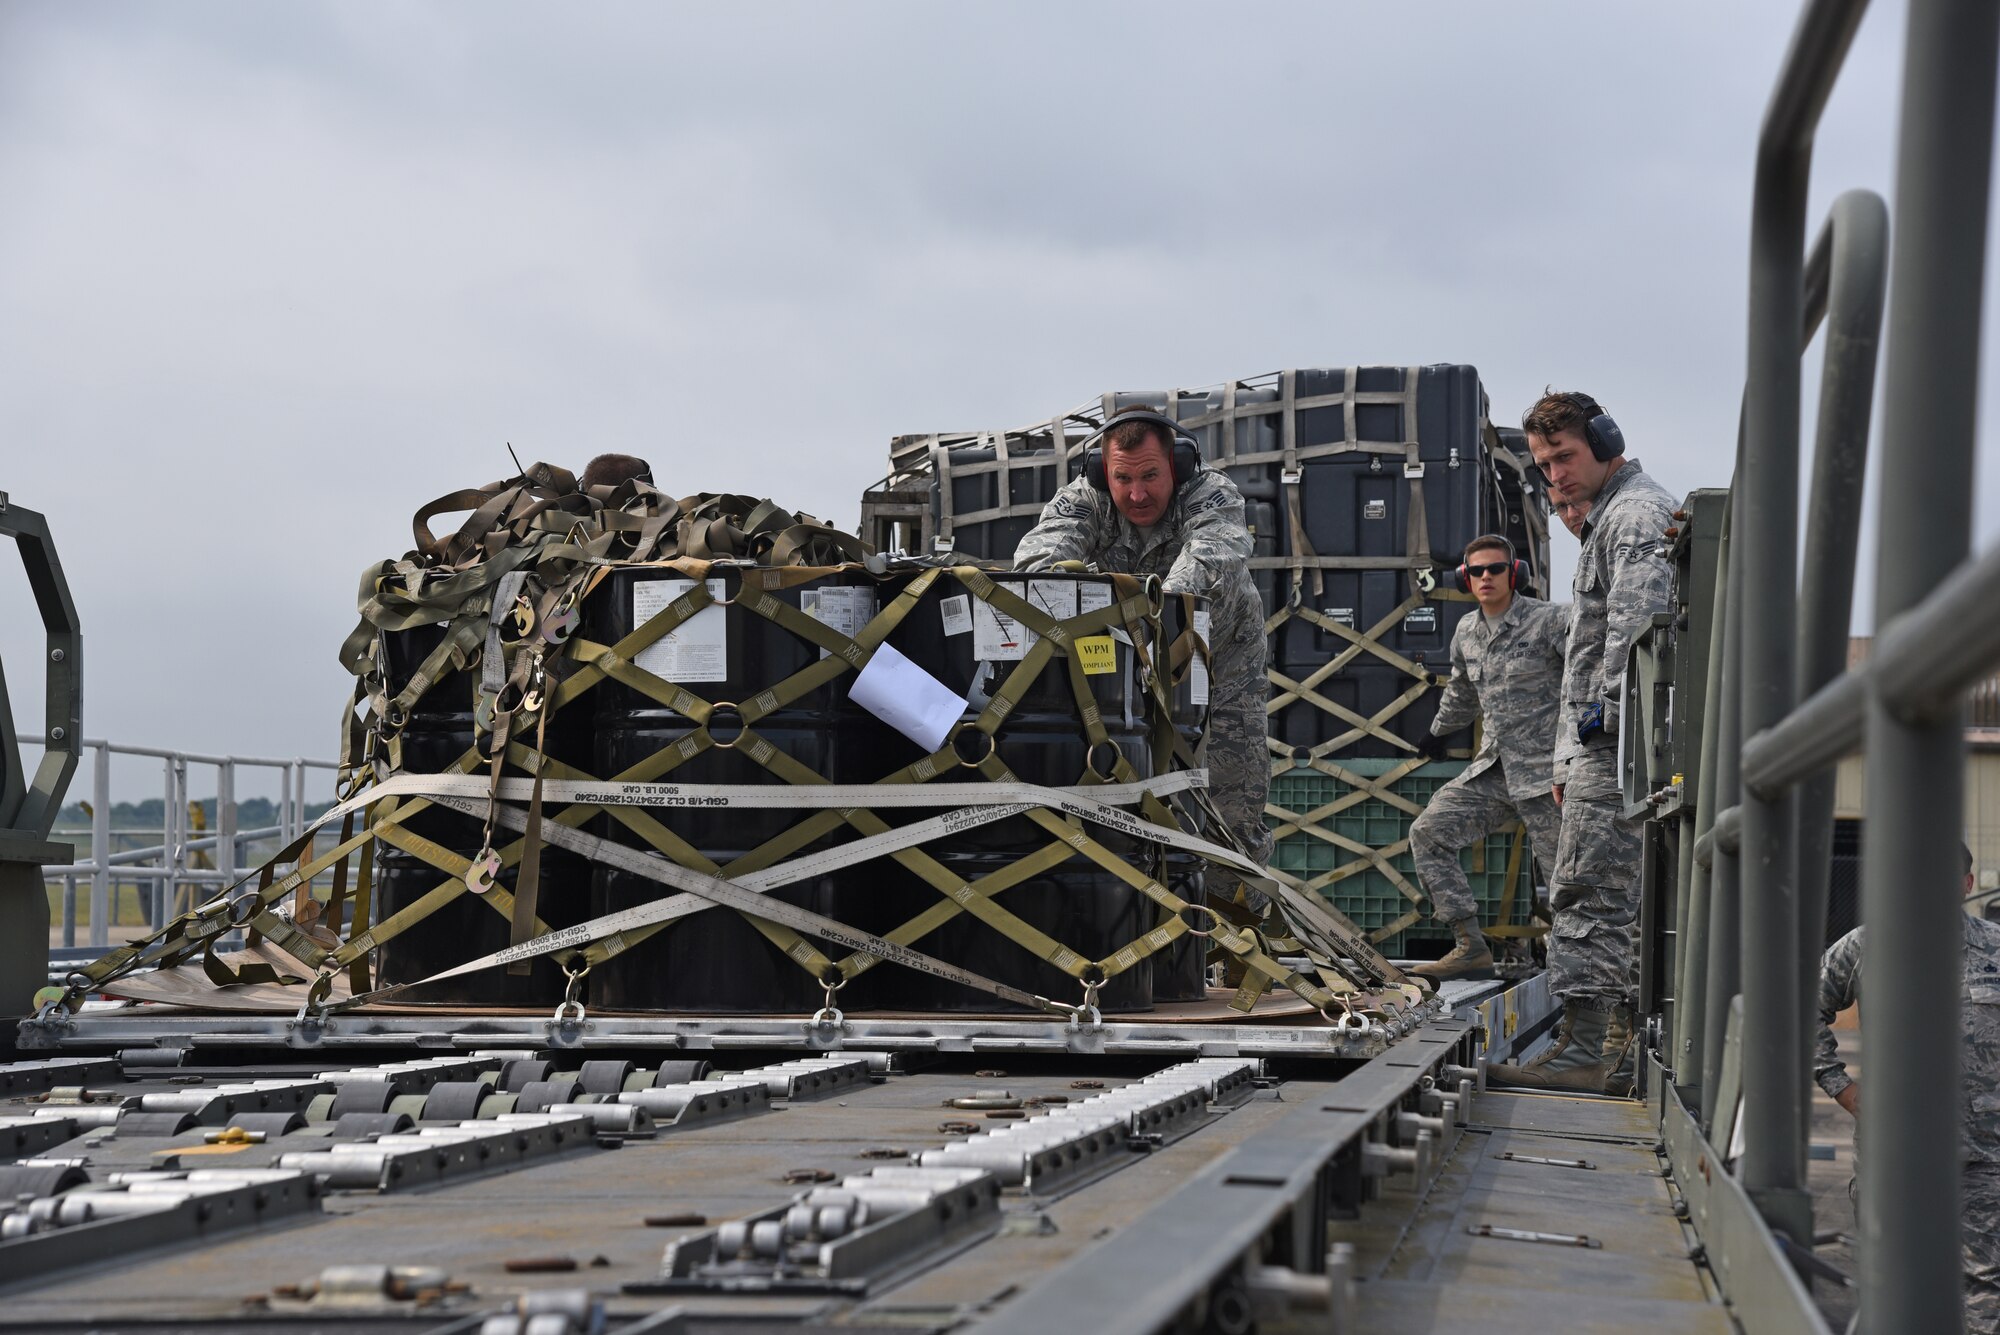 Airmen from the 161st Logistics Readiness Squadron push a palletized load onto a 60K loader during a two-week training exercise at Royal Air Force Lakenheath, England May 29, 2018. The Airmen were able to work alongside their active-duty counterparts at the 48th Logistics Readiness Squadron aerial port to get hands-on experience and training and improve overall mission readiness. (U.S. Air National Guard photo by Staff Sgt. Dillon Davis)